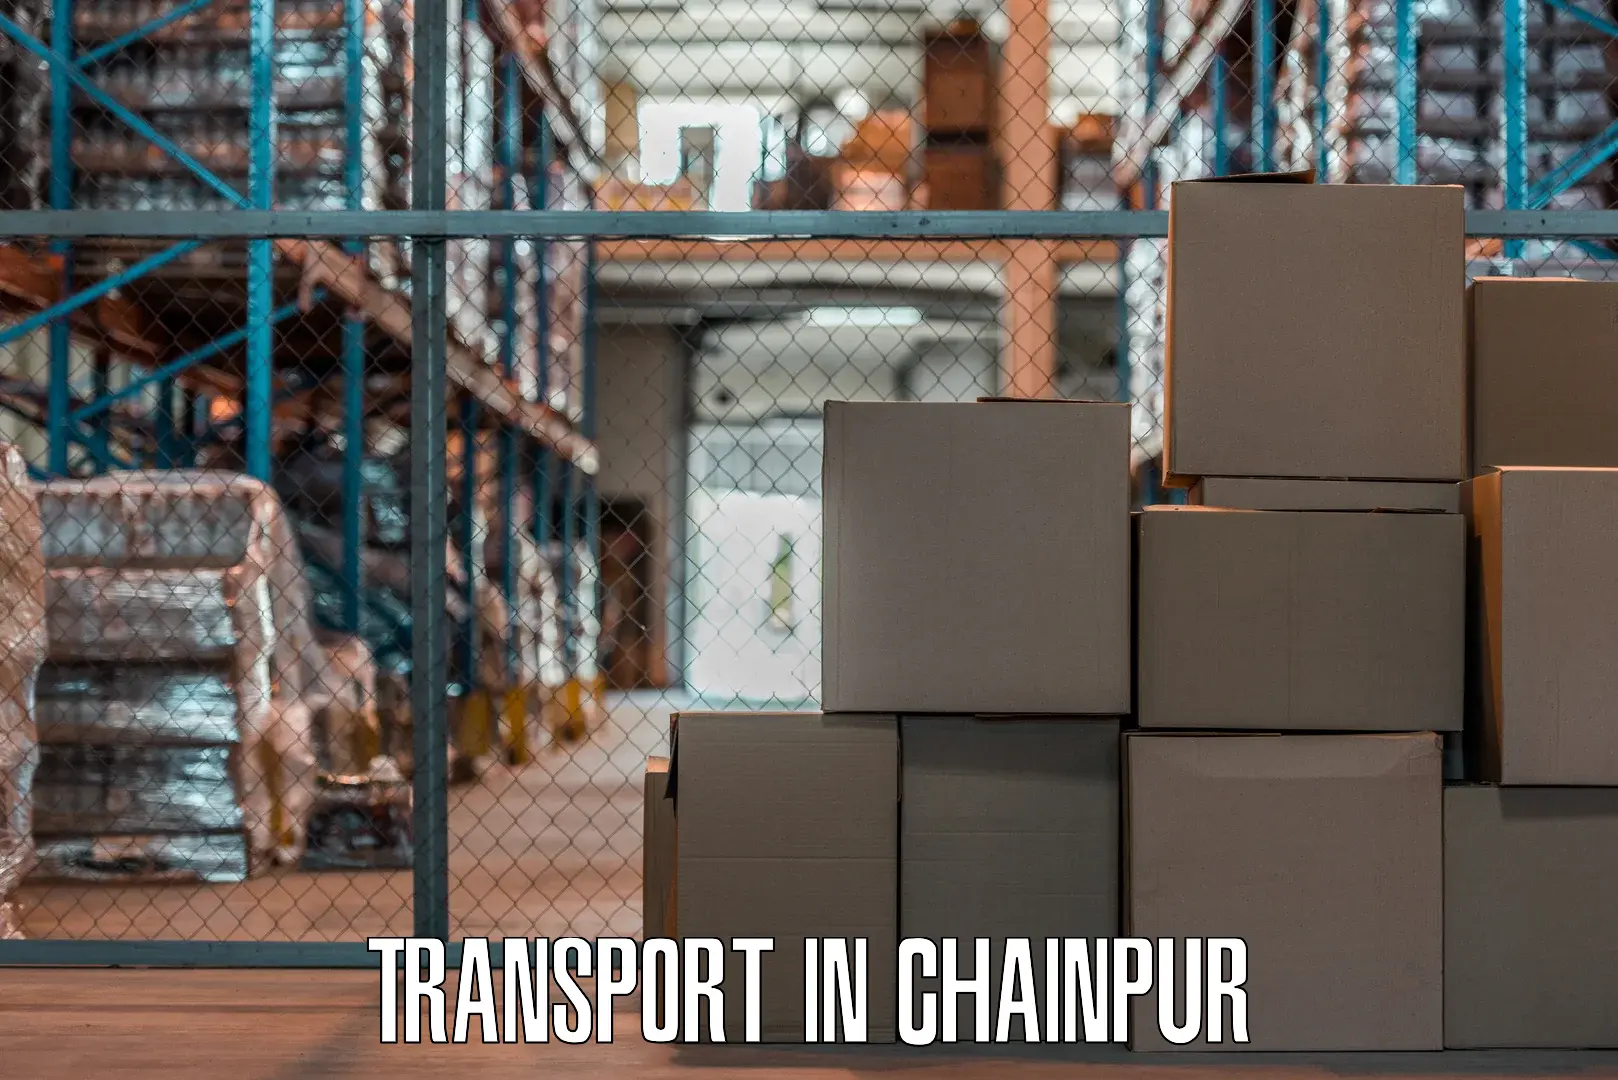 Daily transport service in Chainpur